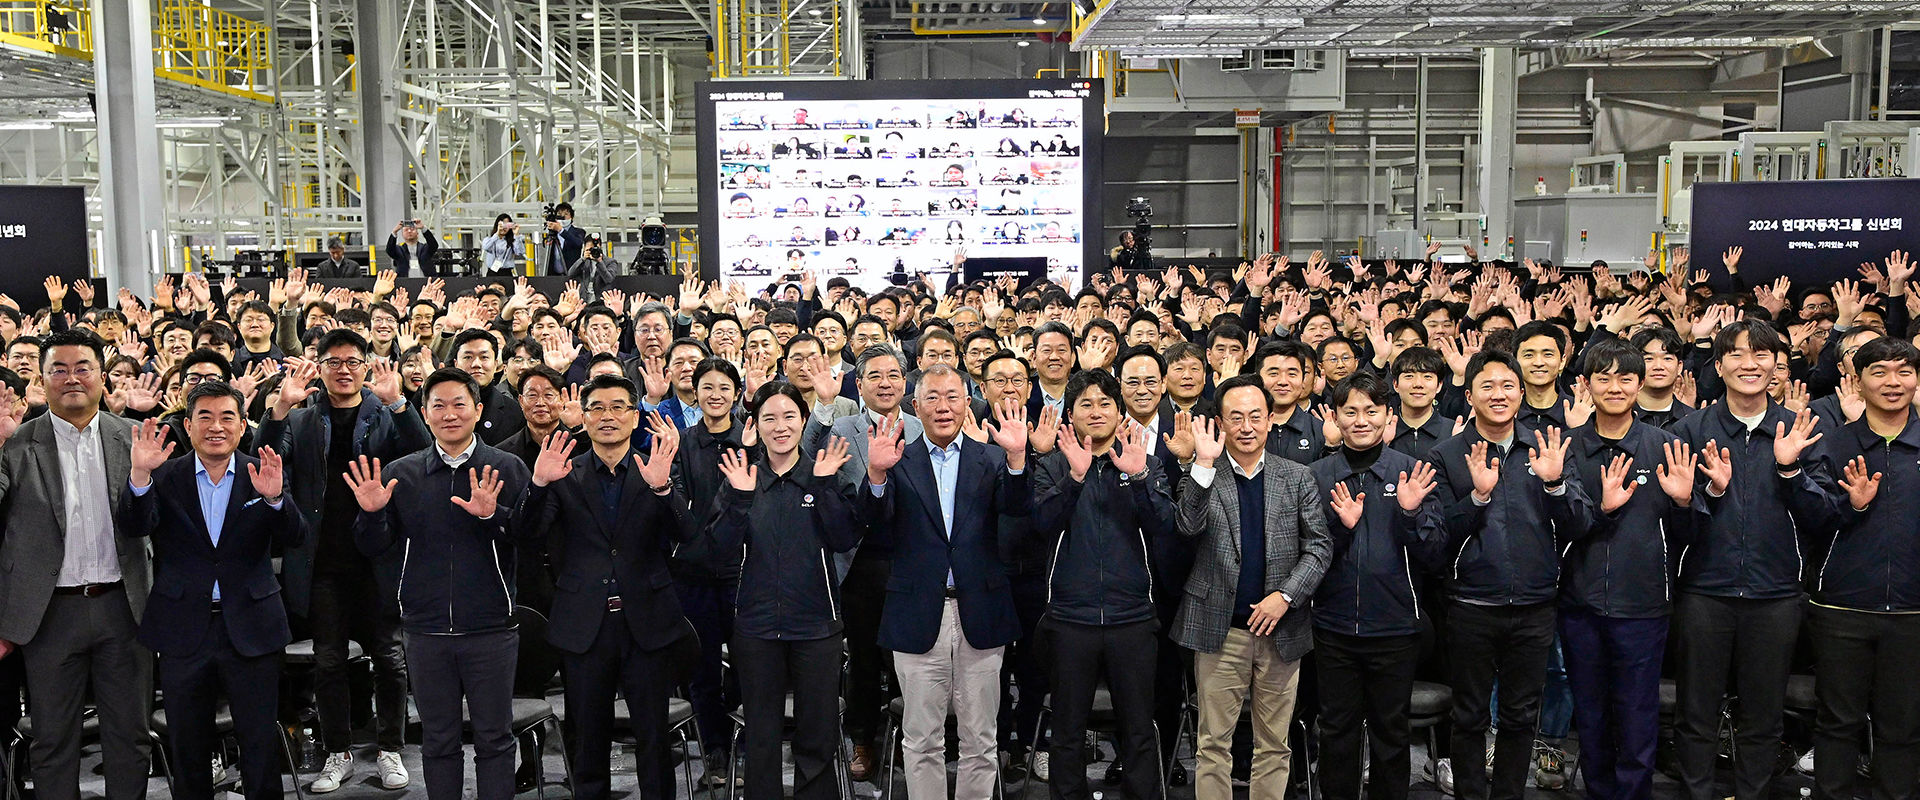 Hyundai Motor Group Executive Chair Euisun Chung Outlines ‘Sustainable Growth through Consistent Change’ in New Year’s Message